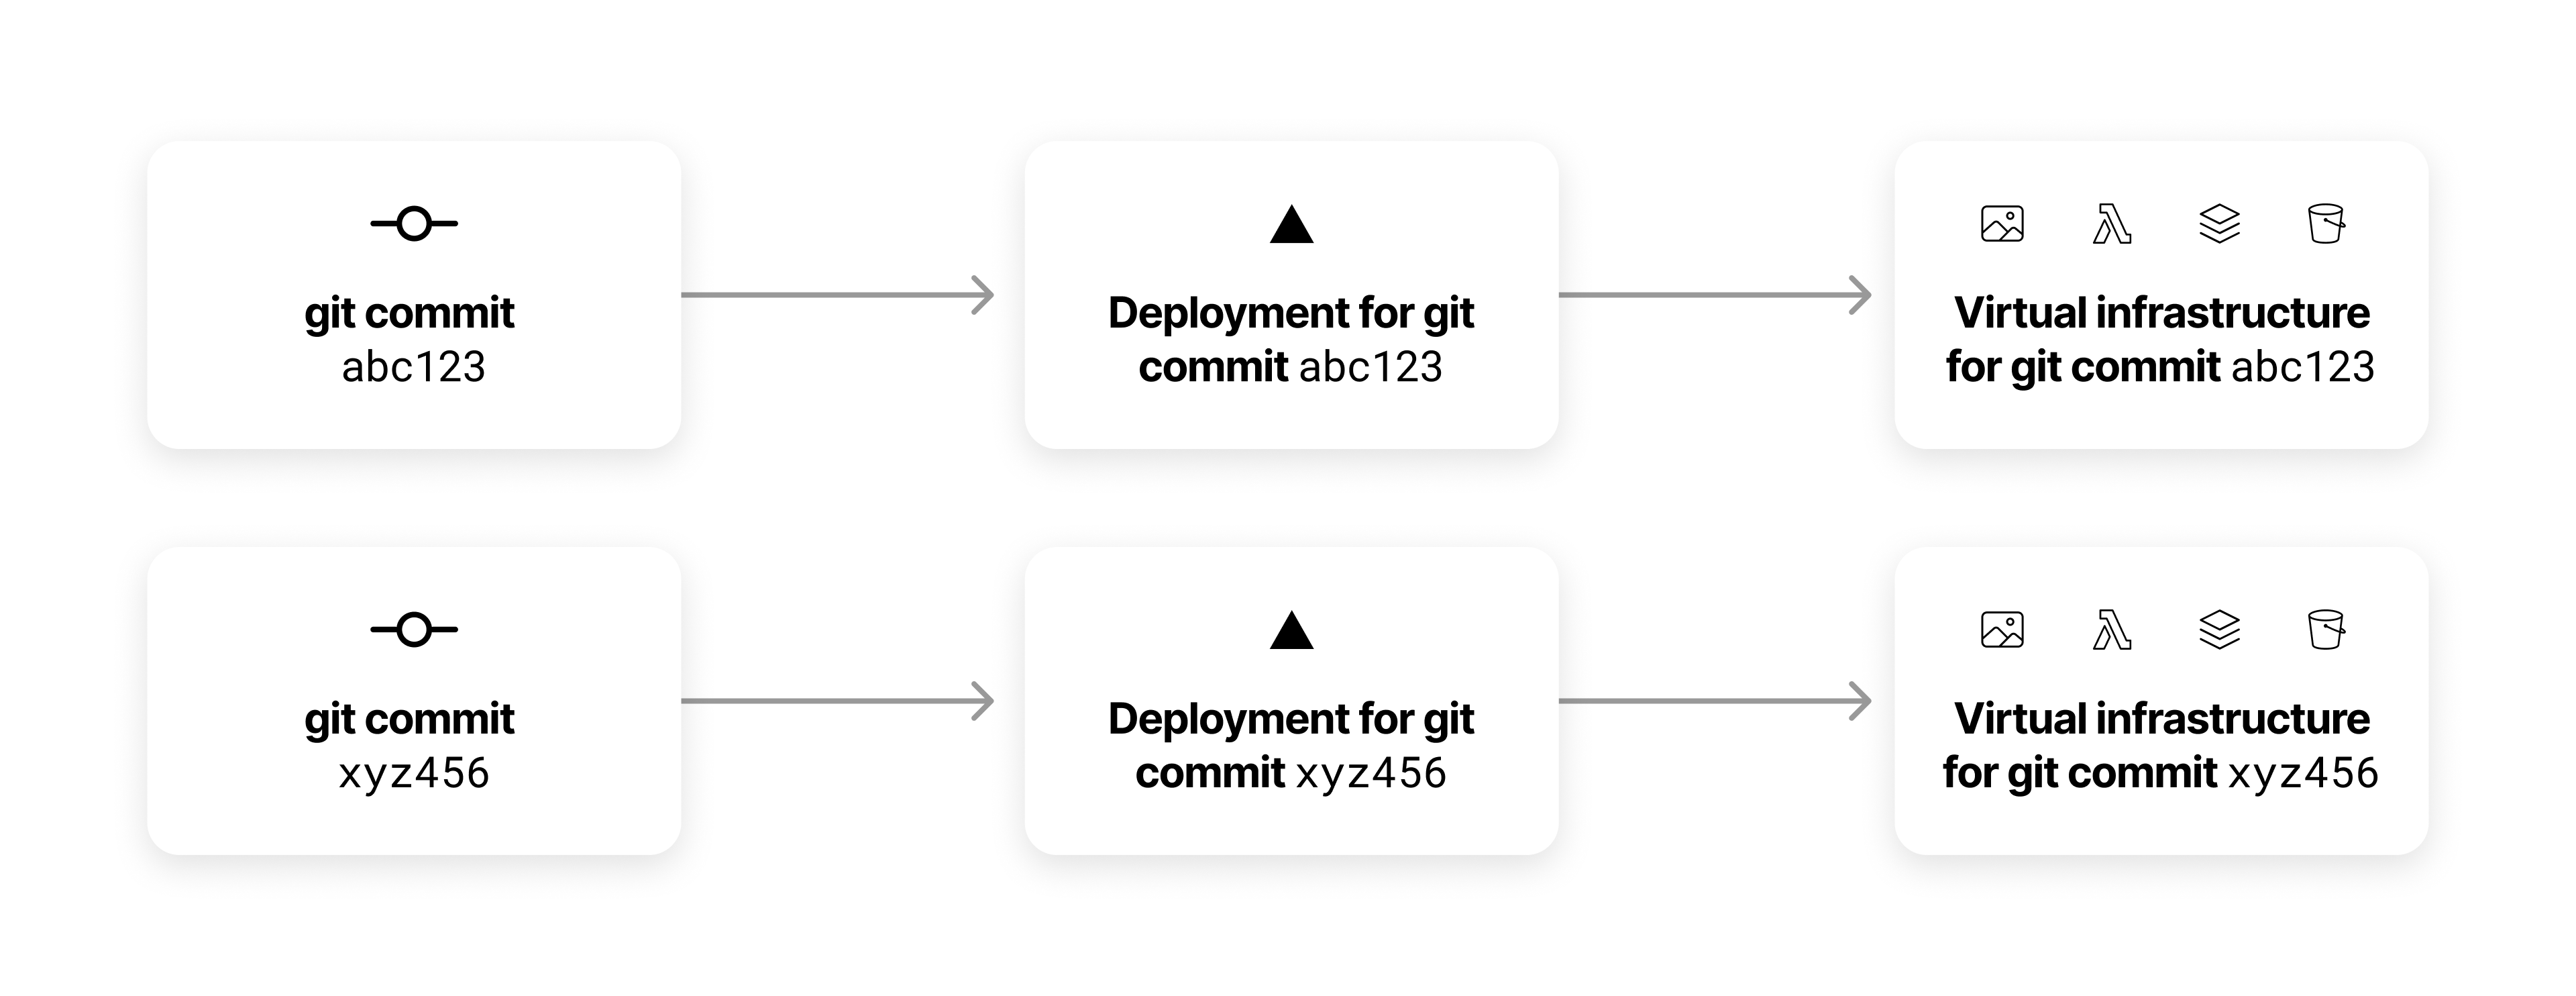 Each commit gets an immutable deployment and generates virtual infrastructure.